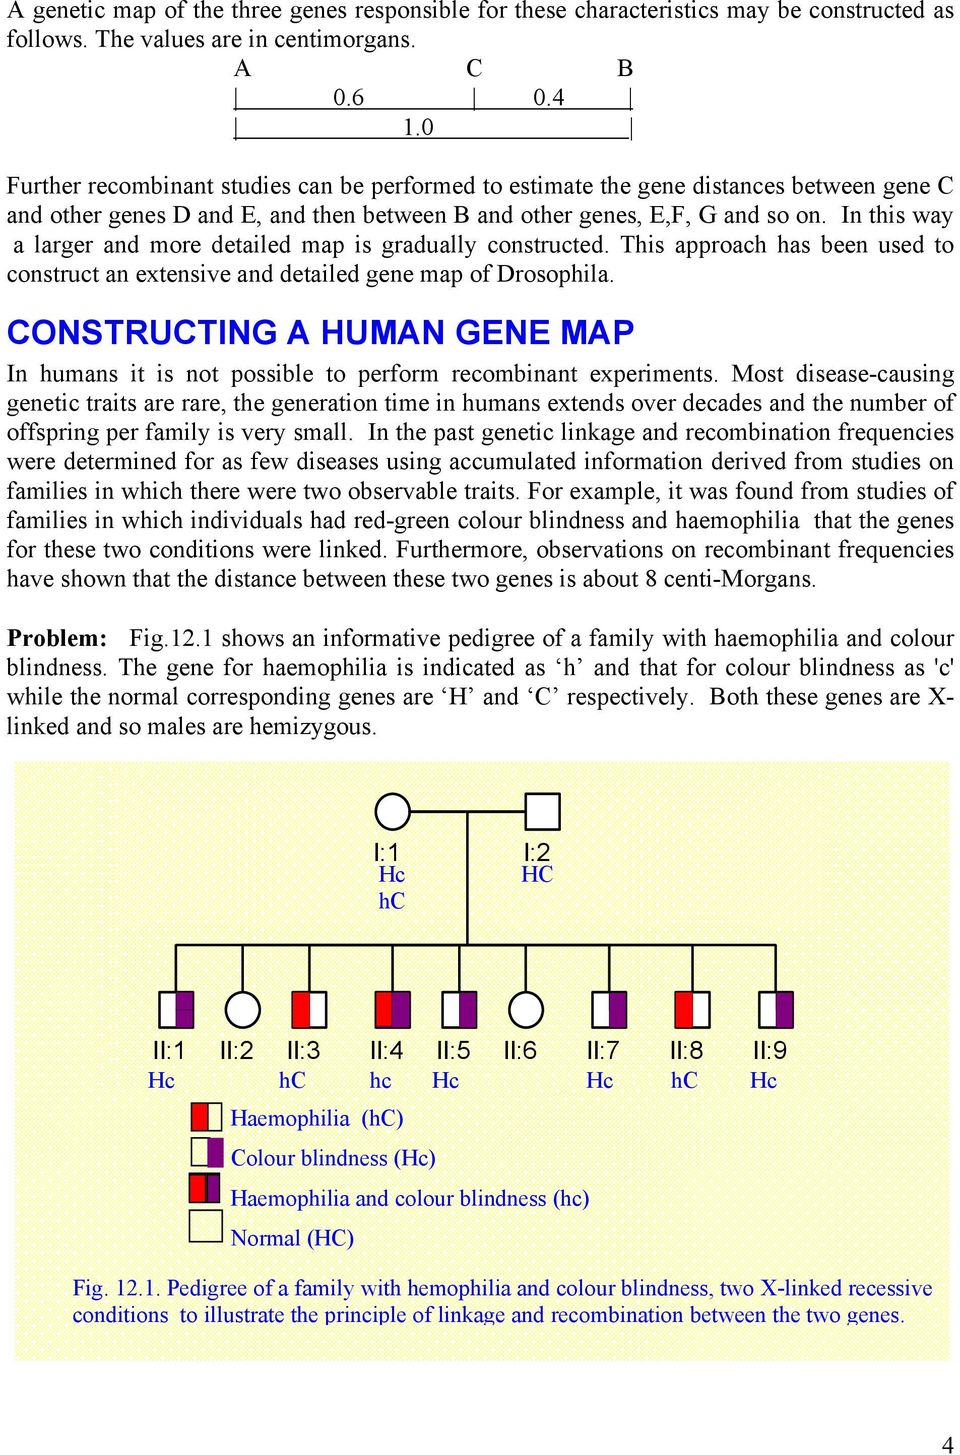 In this way a larger and more detailed map is gradually constructed. This approach has been used to construct an extensive and detailed gene map of Drosophila.